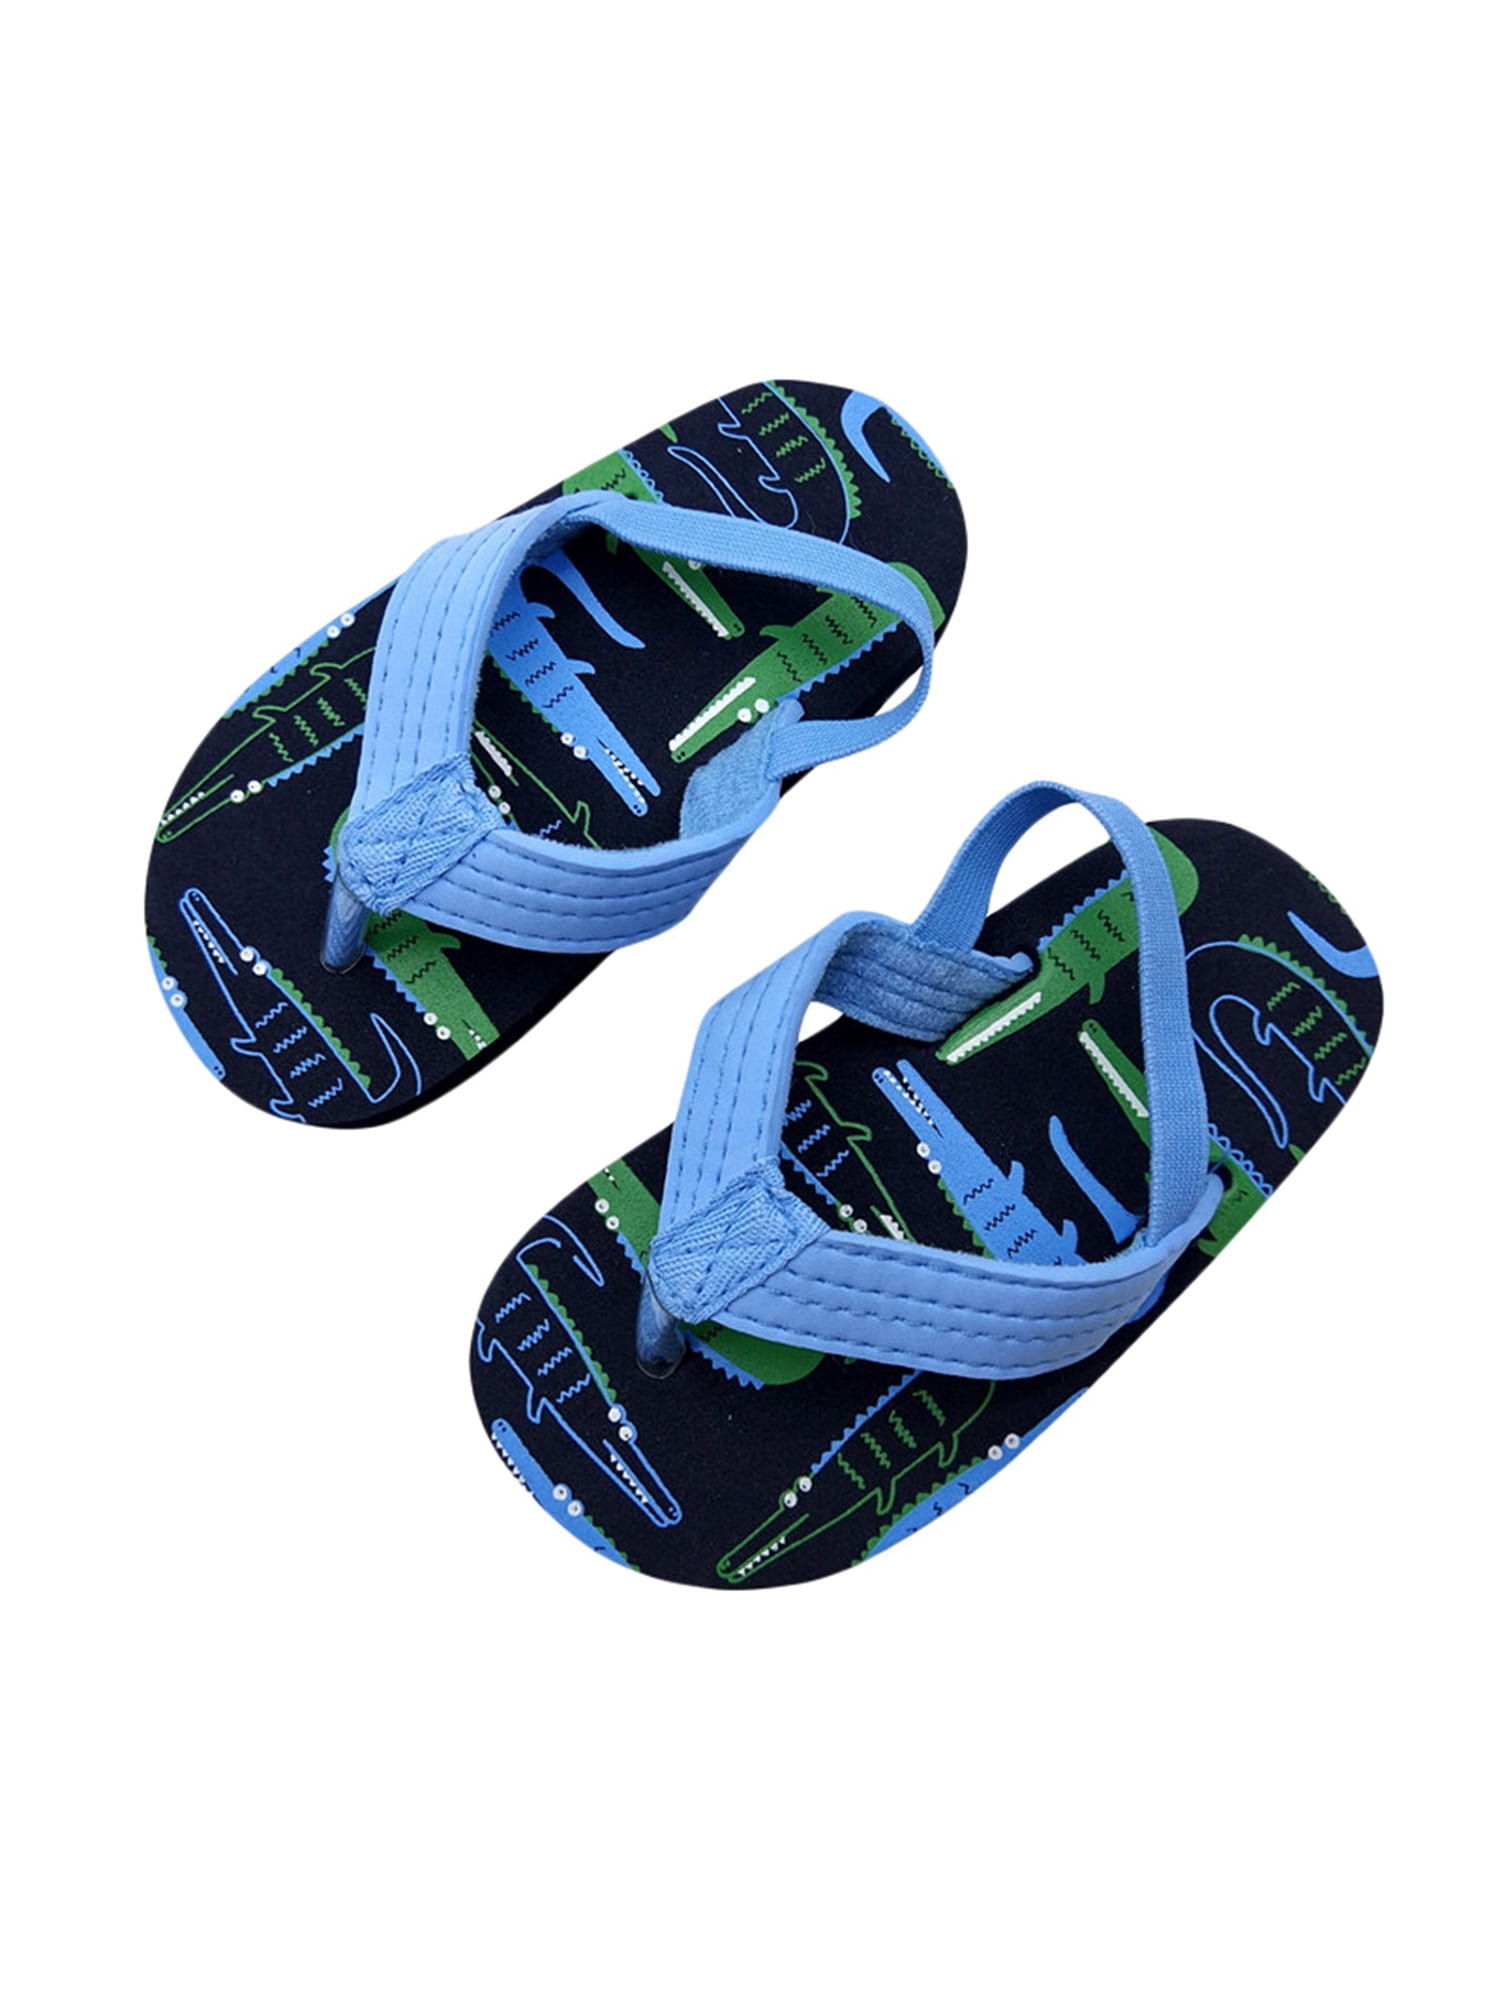 Boys and Girls Flip Flops Sandals with Back Strap for Toddler Little Kid NORTY 